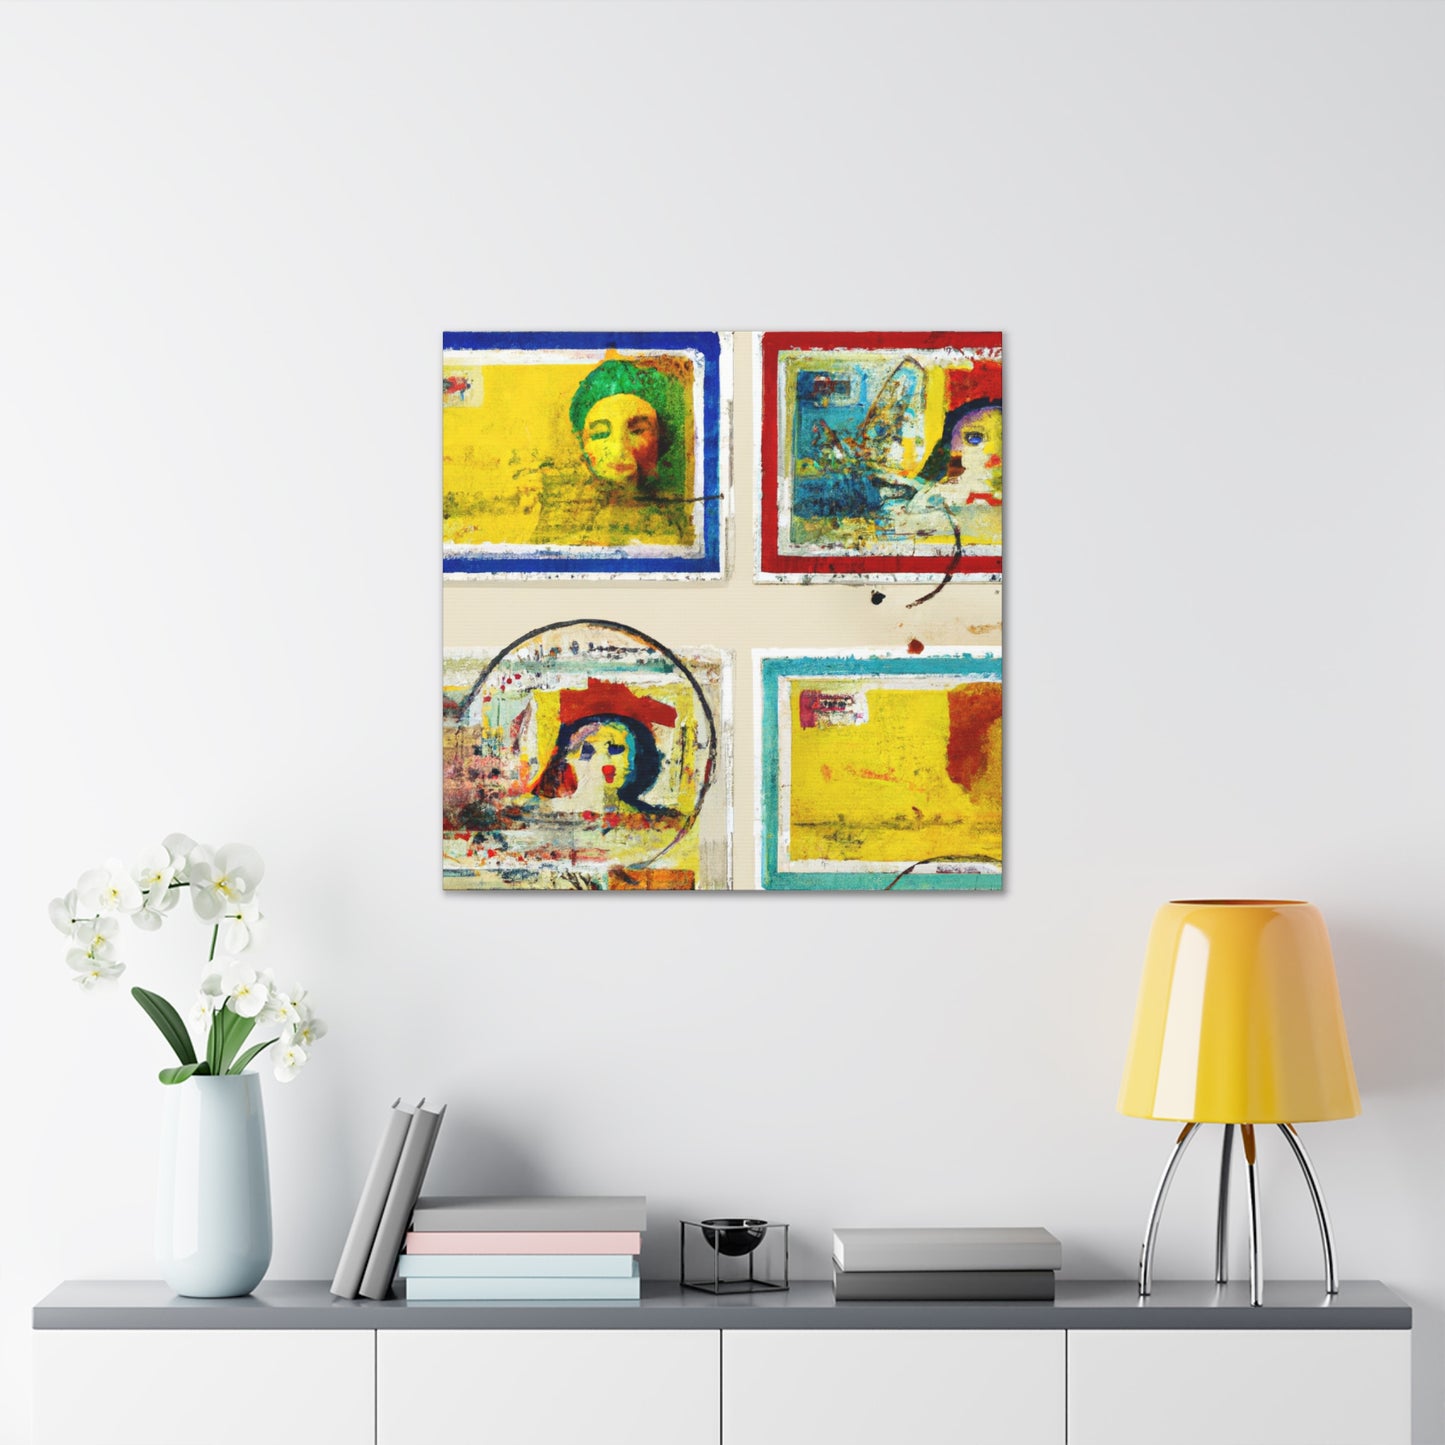 Global Postage Forever! - Postage Stamp Collector Canvas Wall Art